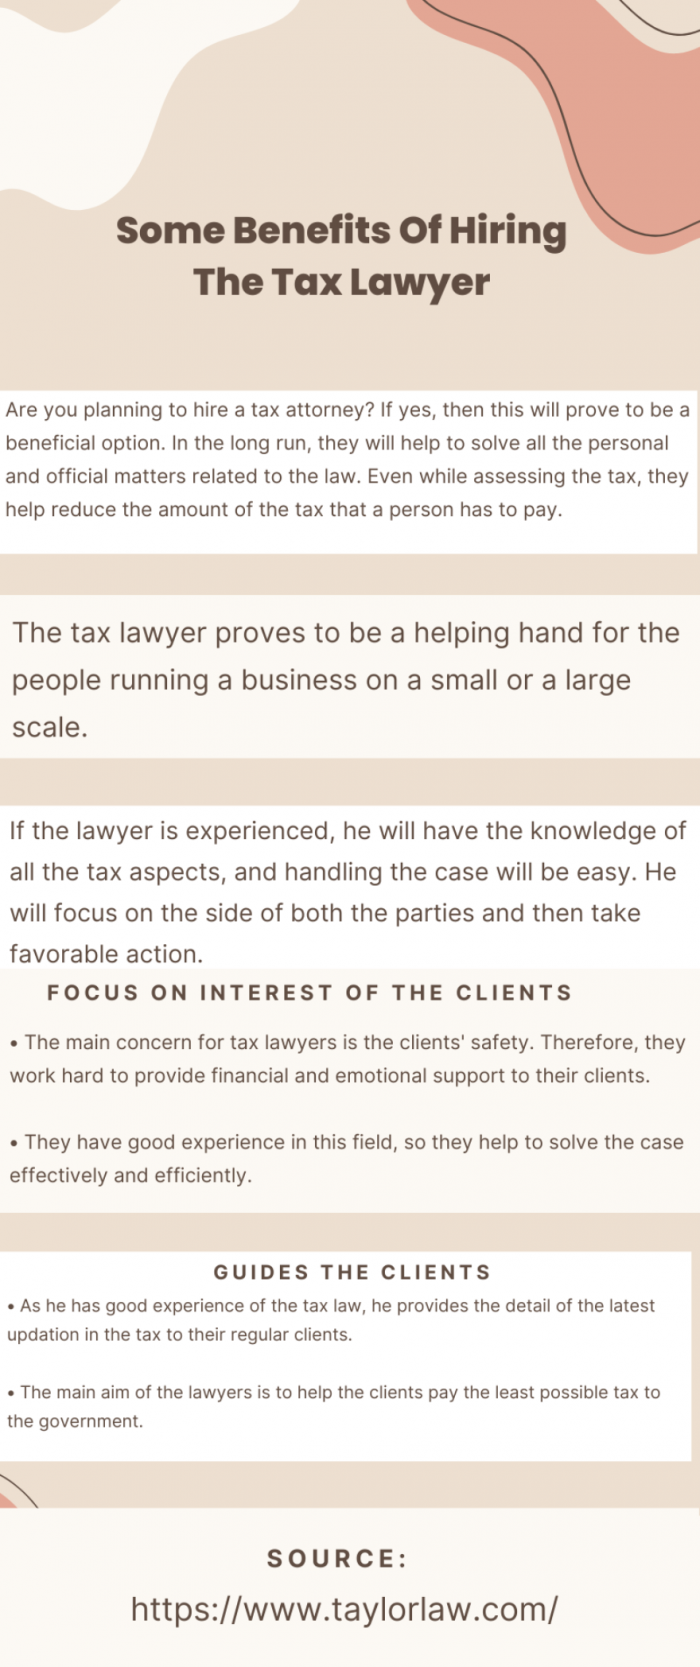 Some Benefits Of Hiring The Tax Lawyer